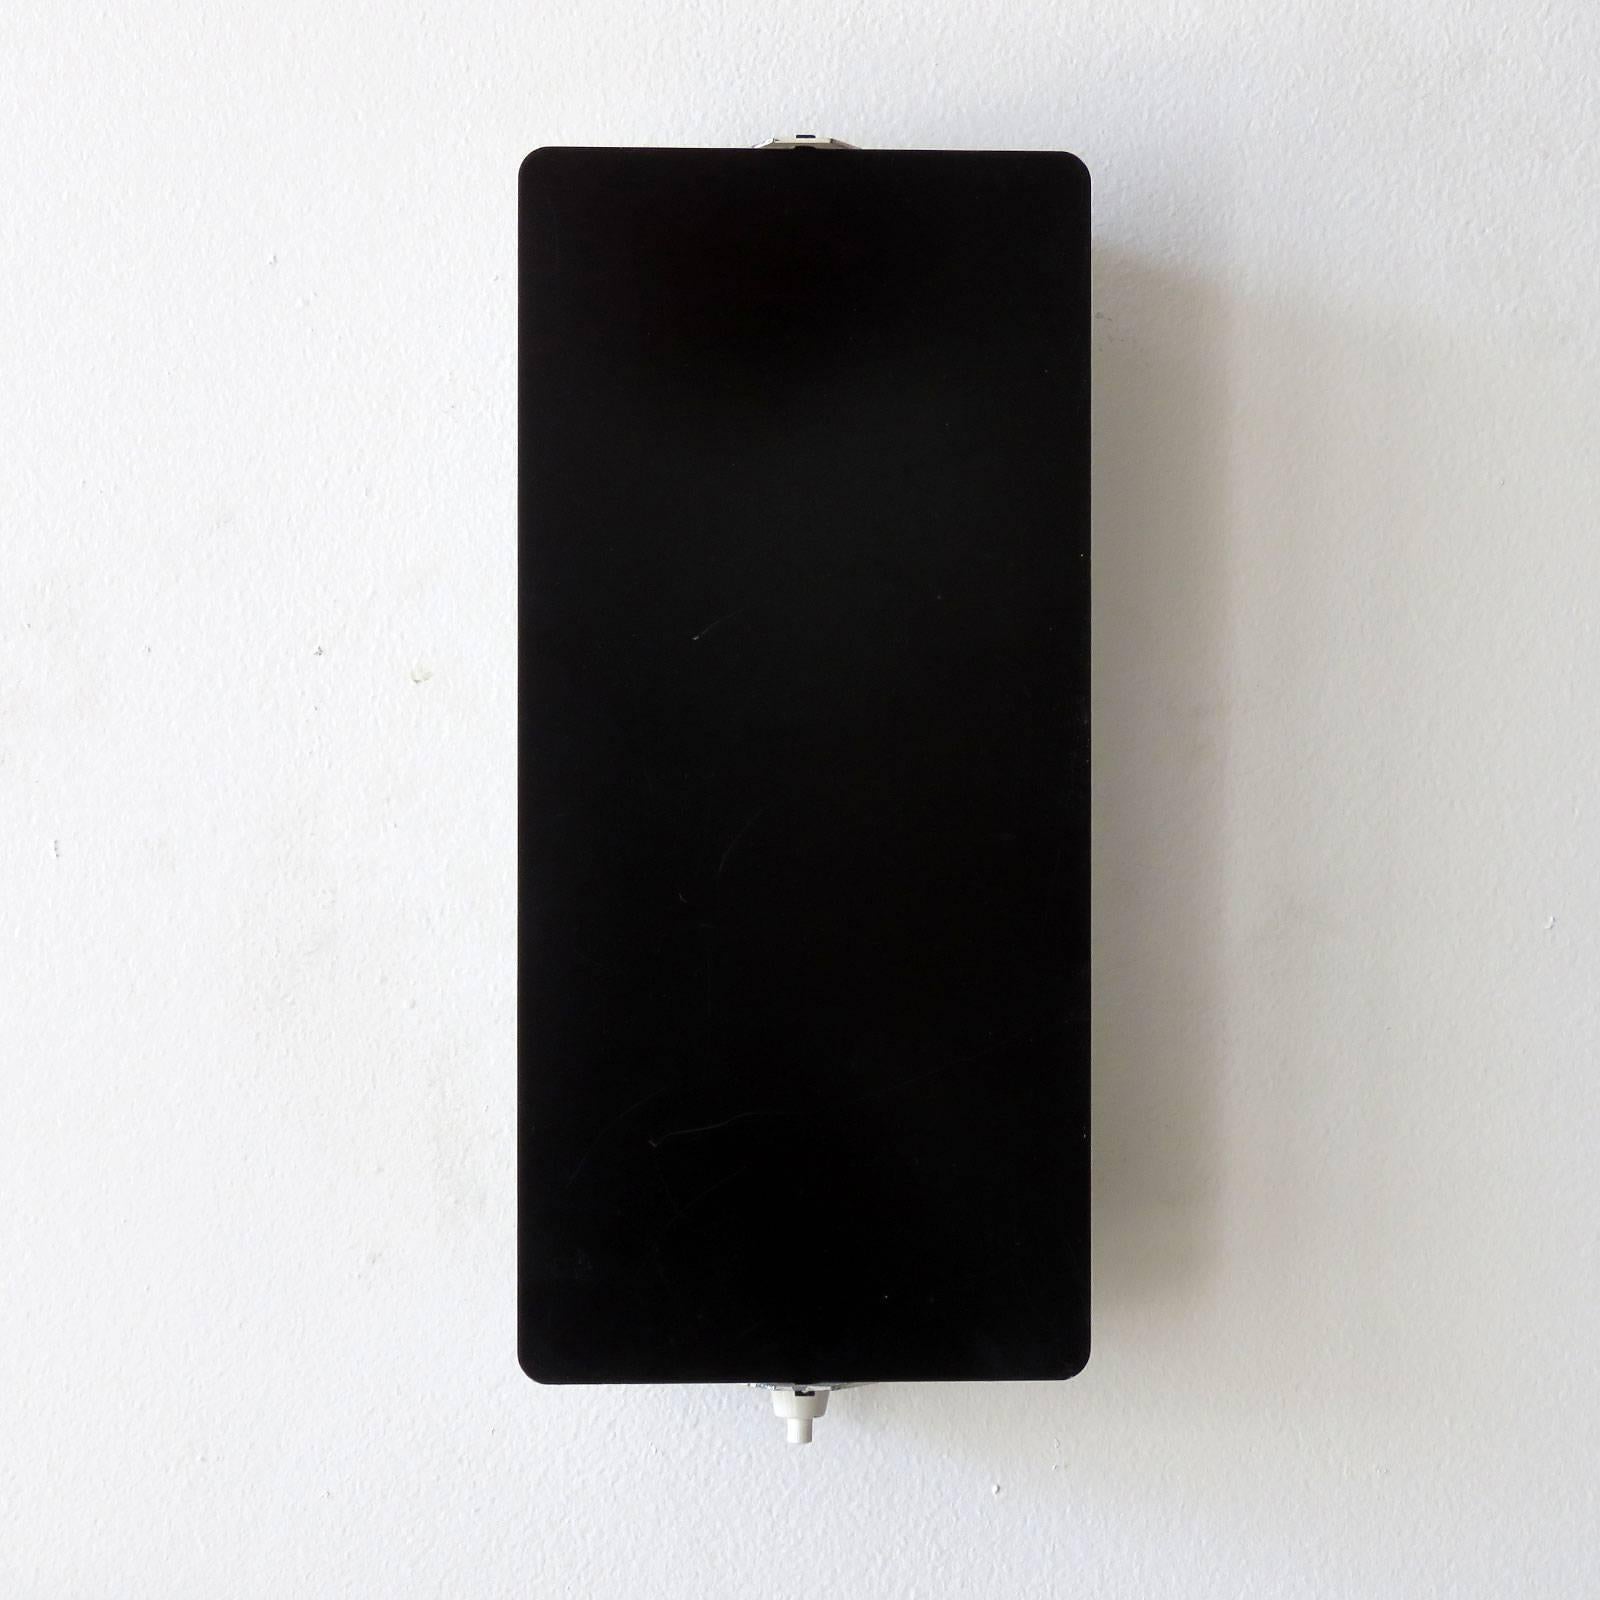 Rare large scale enameled wall lights by Charlotte Perriand with adjustable reflectors in black enameled finish with two sockets each, optional horizontal or vertical mount, manufactured and distributed by Steph Simon, Paris, marked. Priced